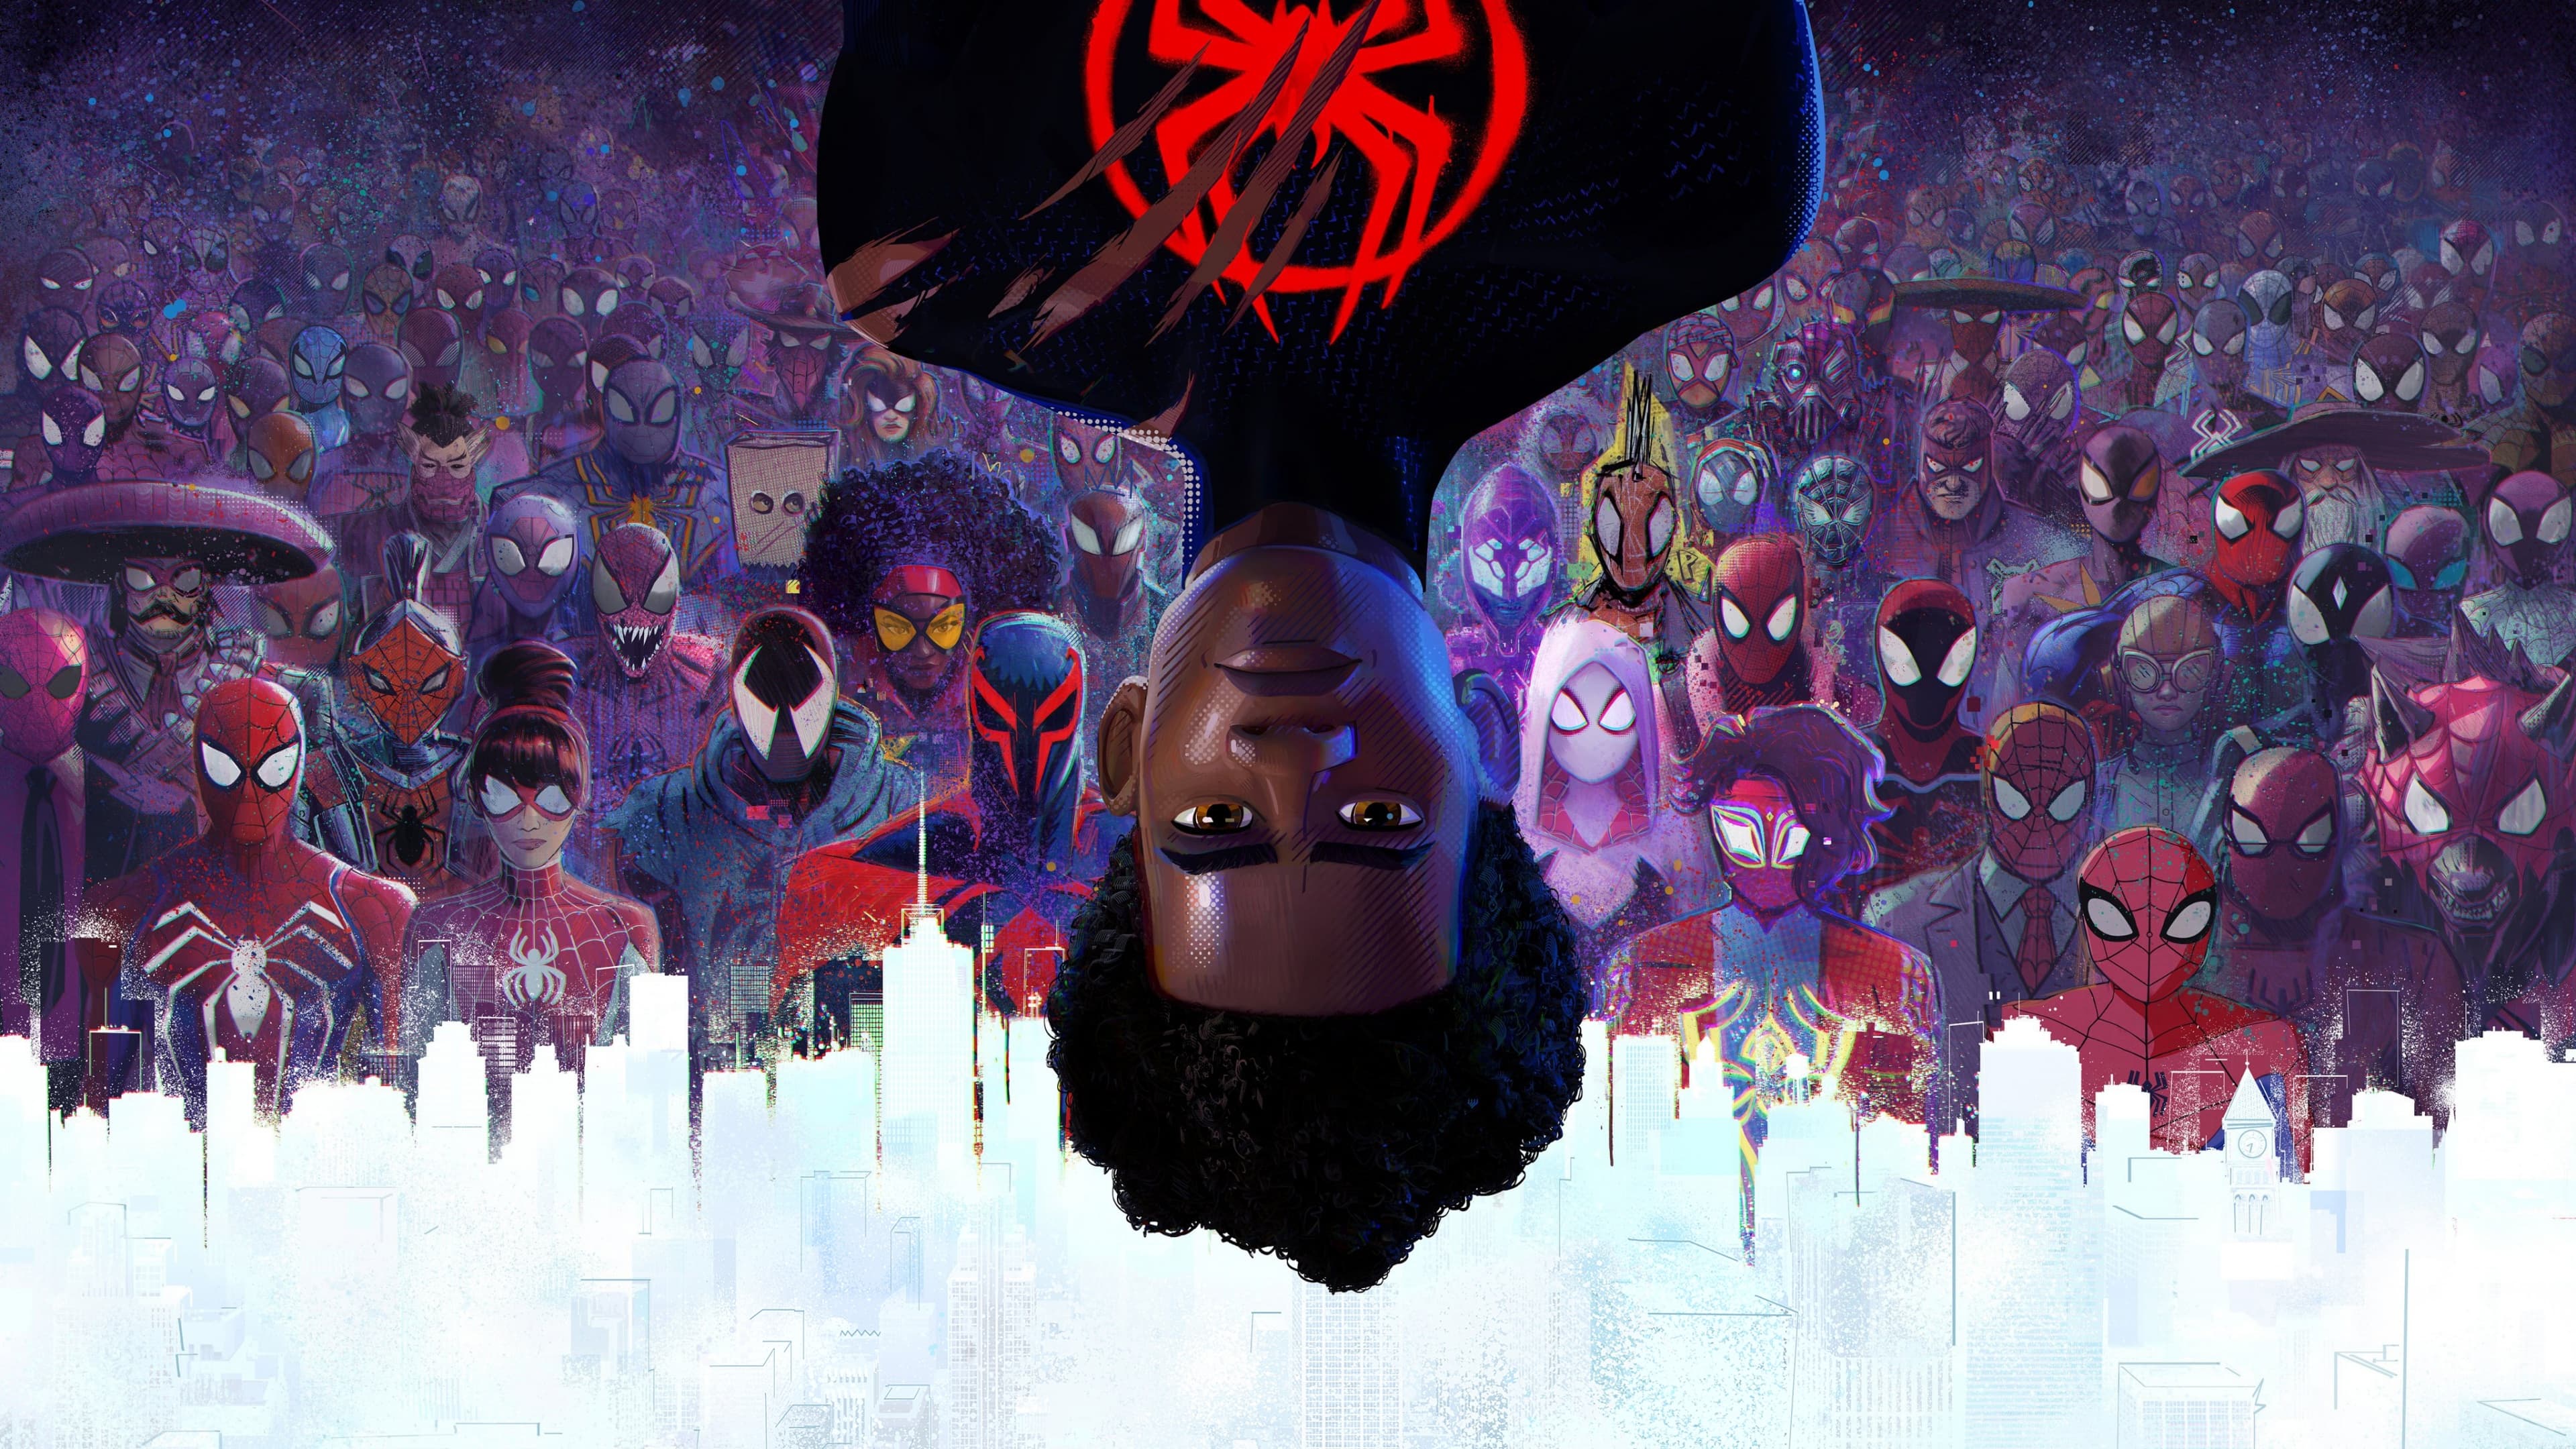 Made this Miles Morales wallpaper for my desktop. Thought I'd share it on  here. Hope you guys like it, and feel free to save it to use for your own  background wallpaper. :